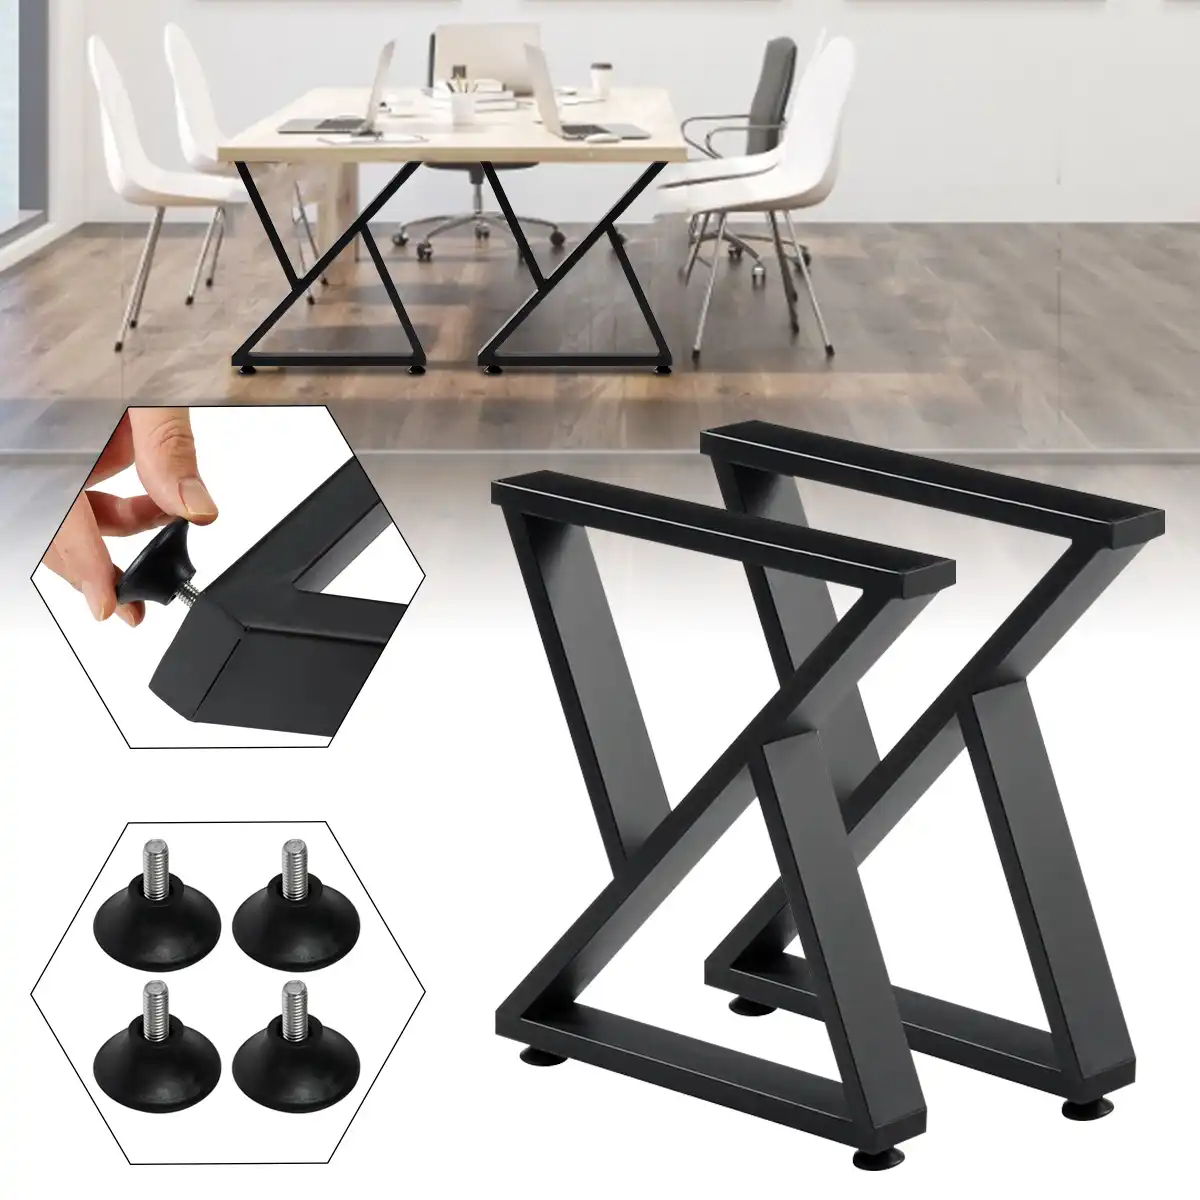 High Quality 28 Dining Table Legs Office Table Legs,Computer Desk Legs,Industrial kitchen table legs,Gray X-shaped Steel table legs